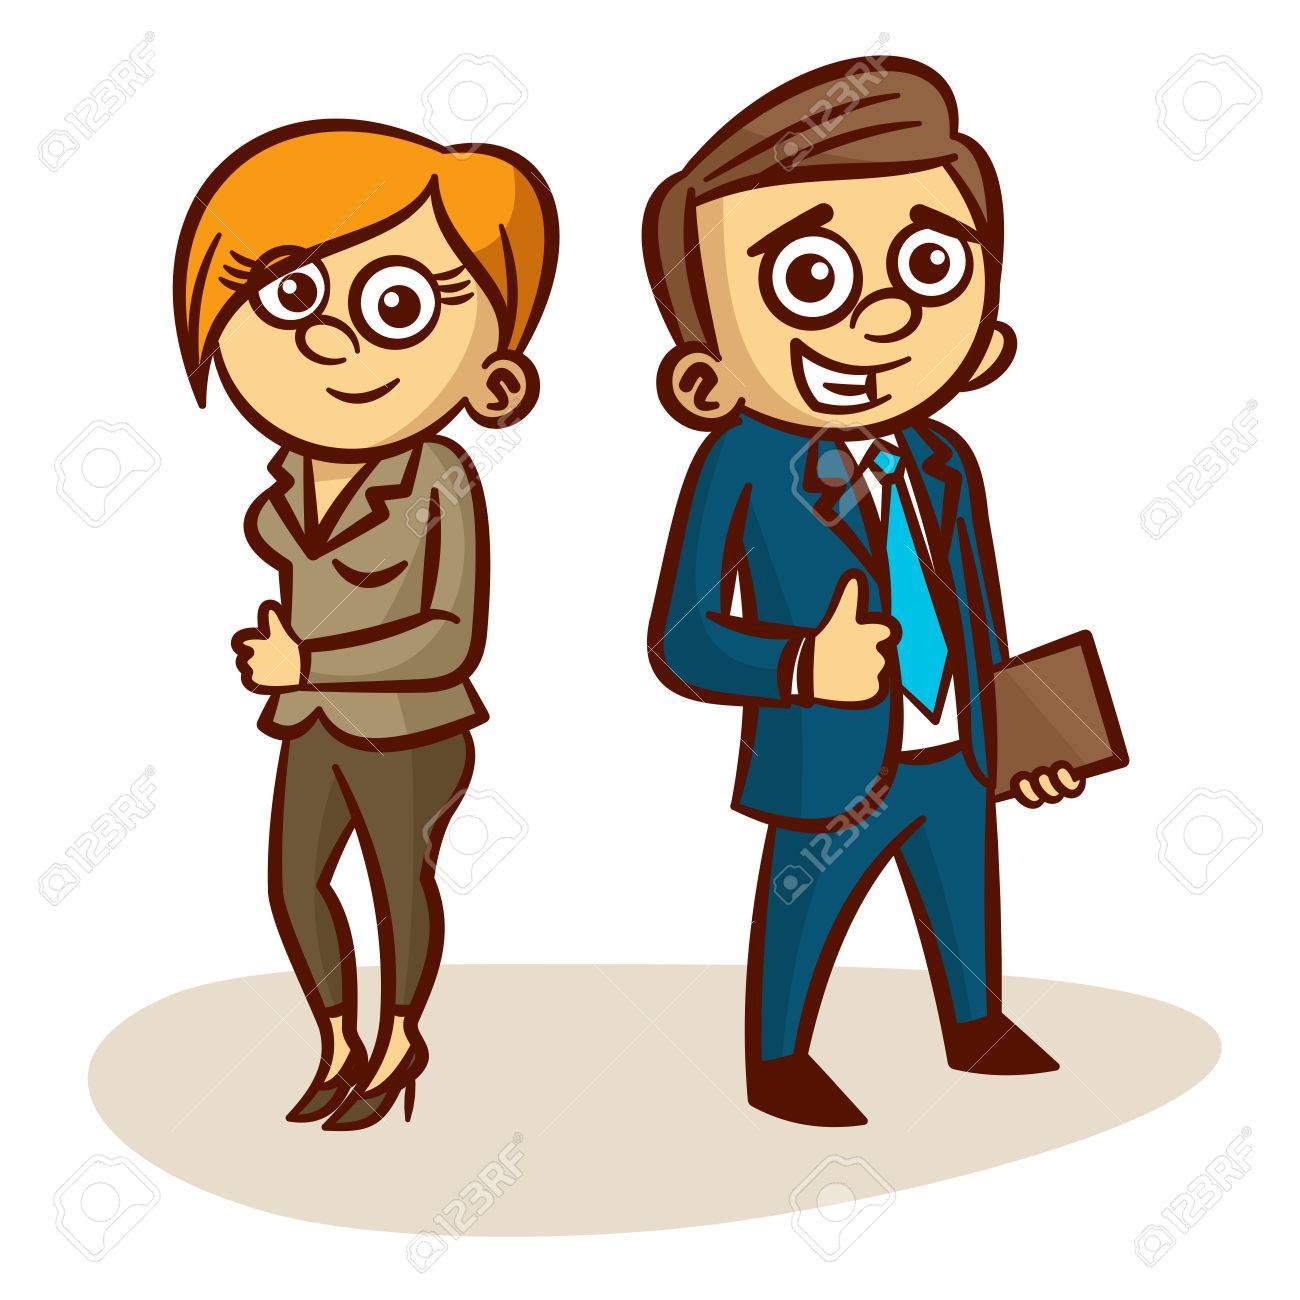 Business Partners Happy Man and a Woman Clipart Stock Vector - 61250305